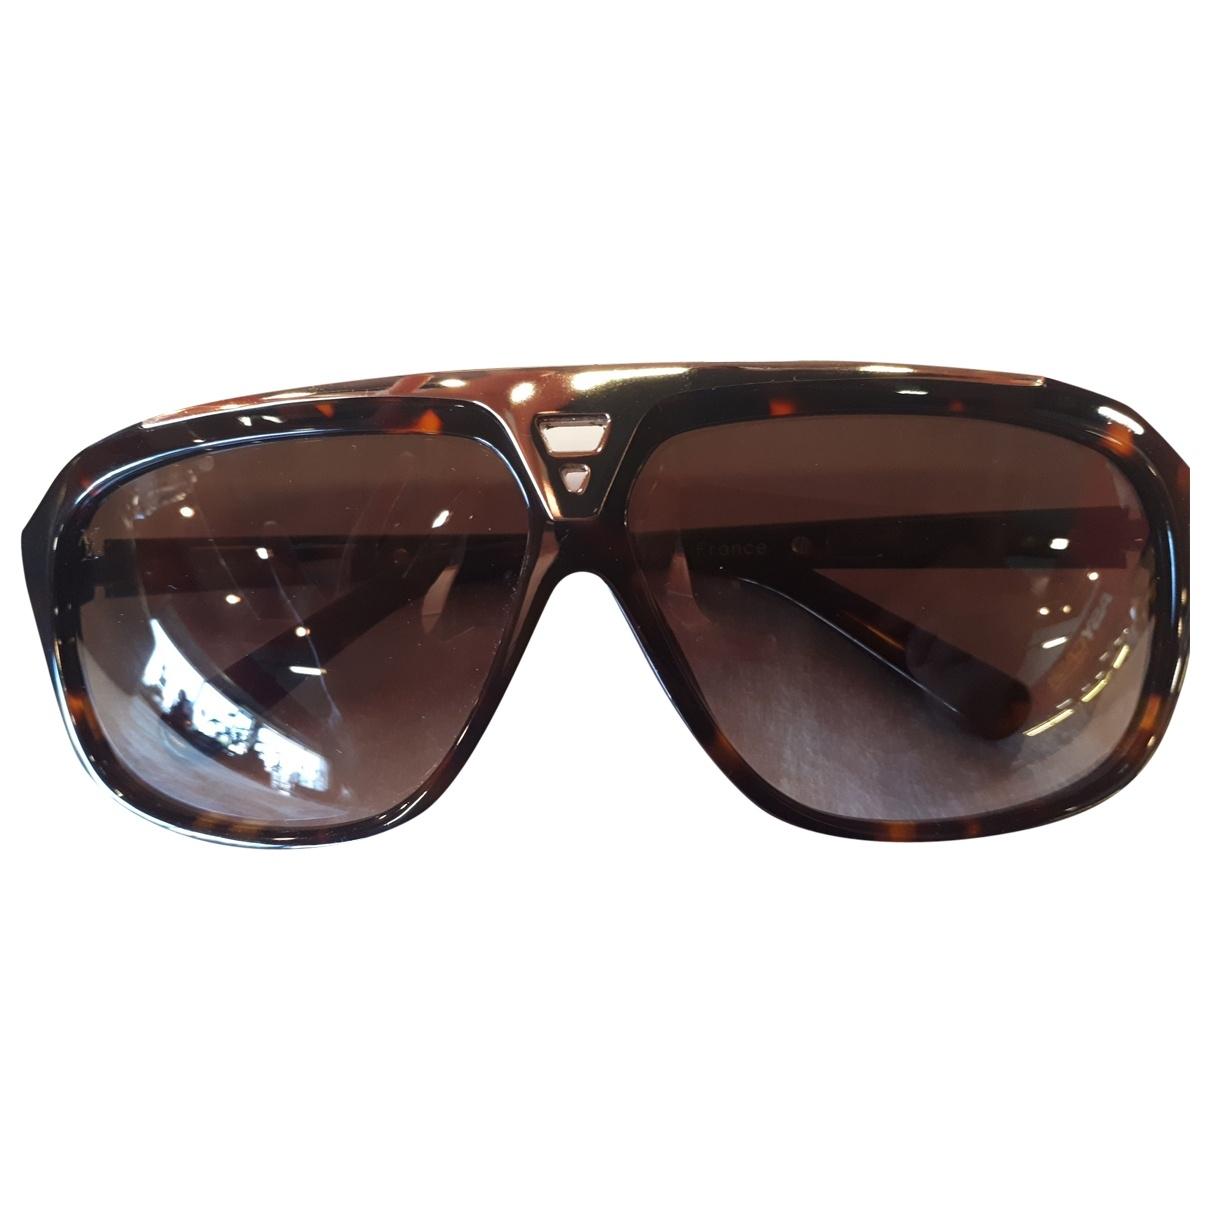 Louis Vuitton Sunglasses in Brown for Men - Lyst